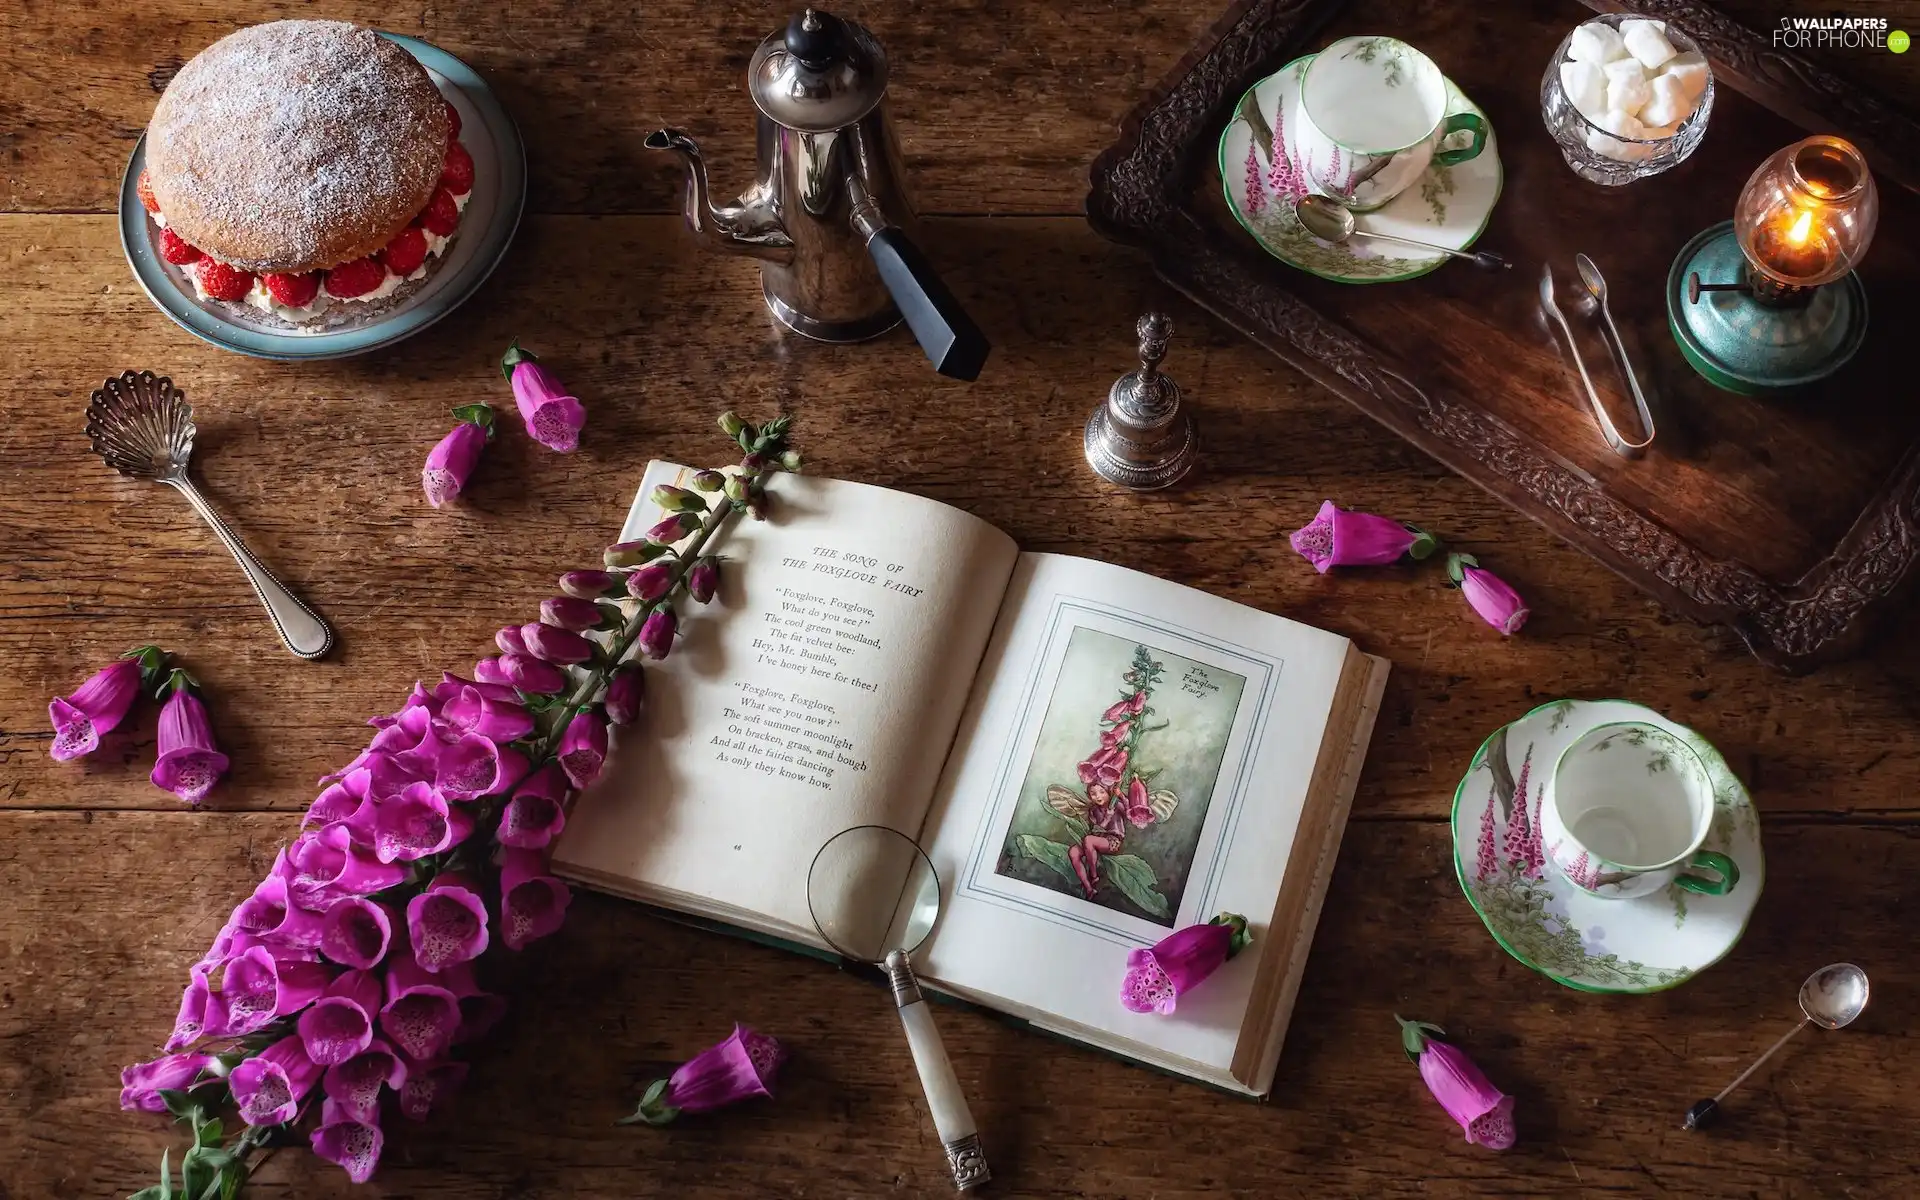 Lamp, cake, plate, Flowers, cups, Book, composition, foxglove